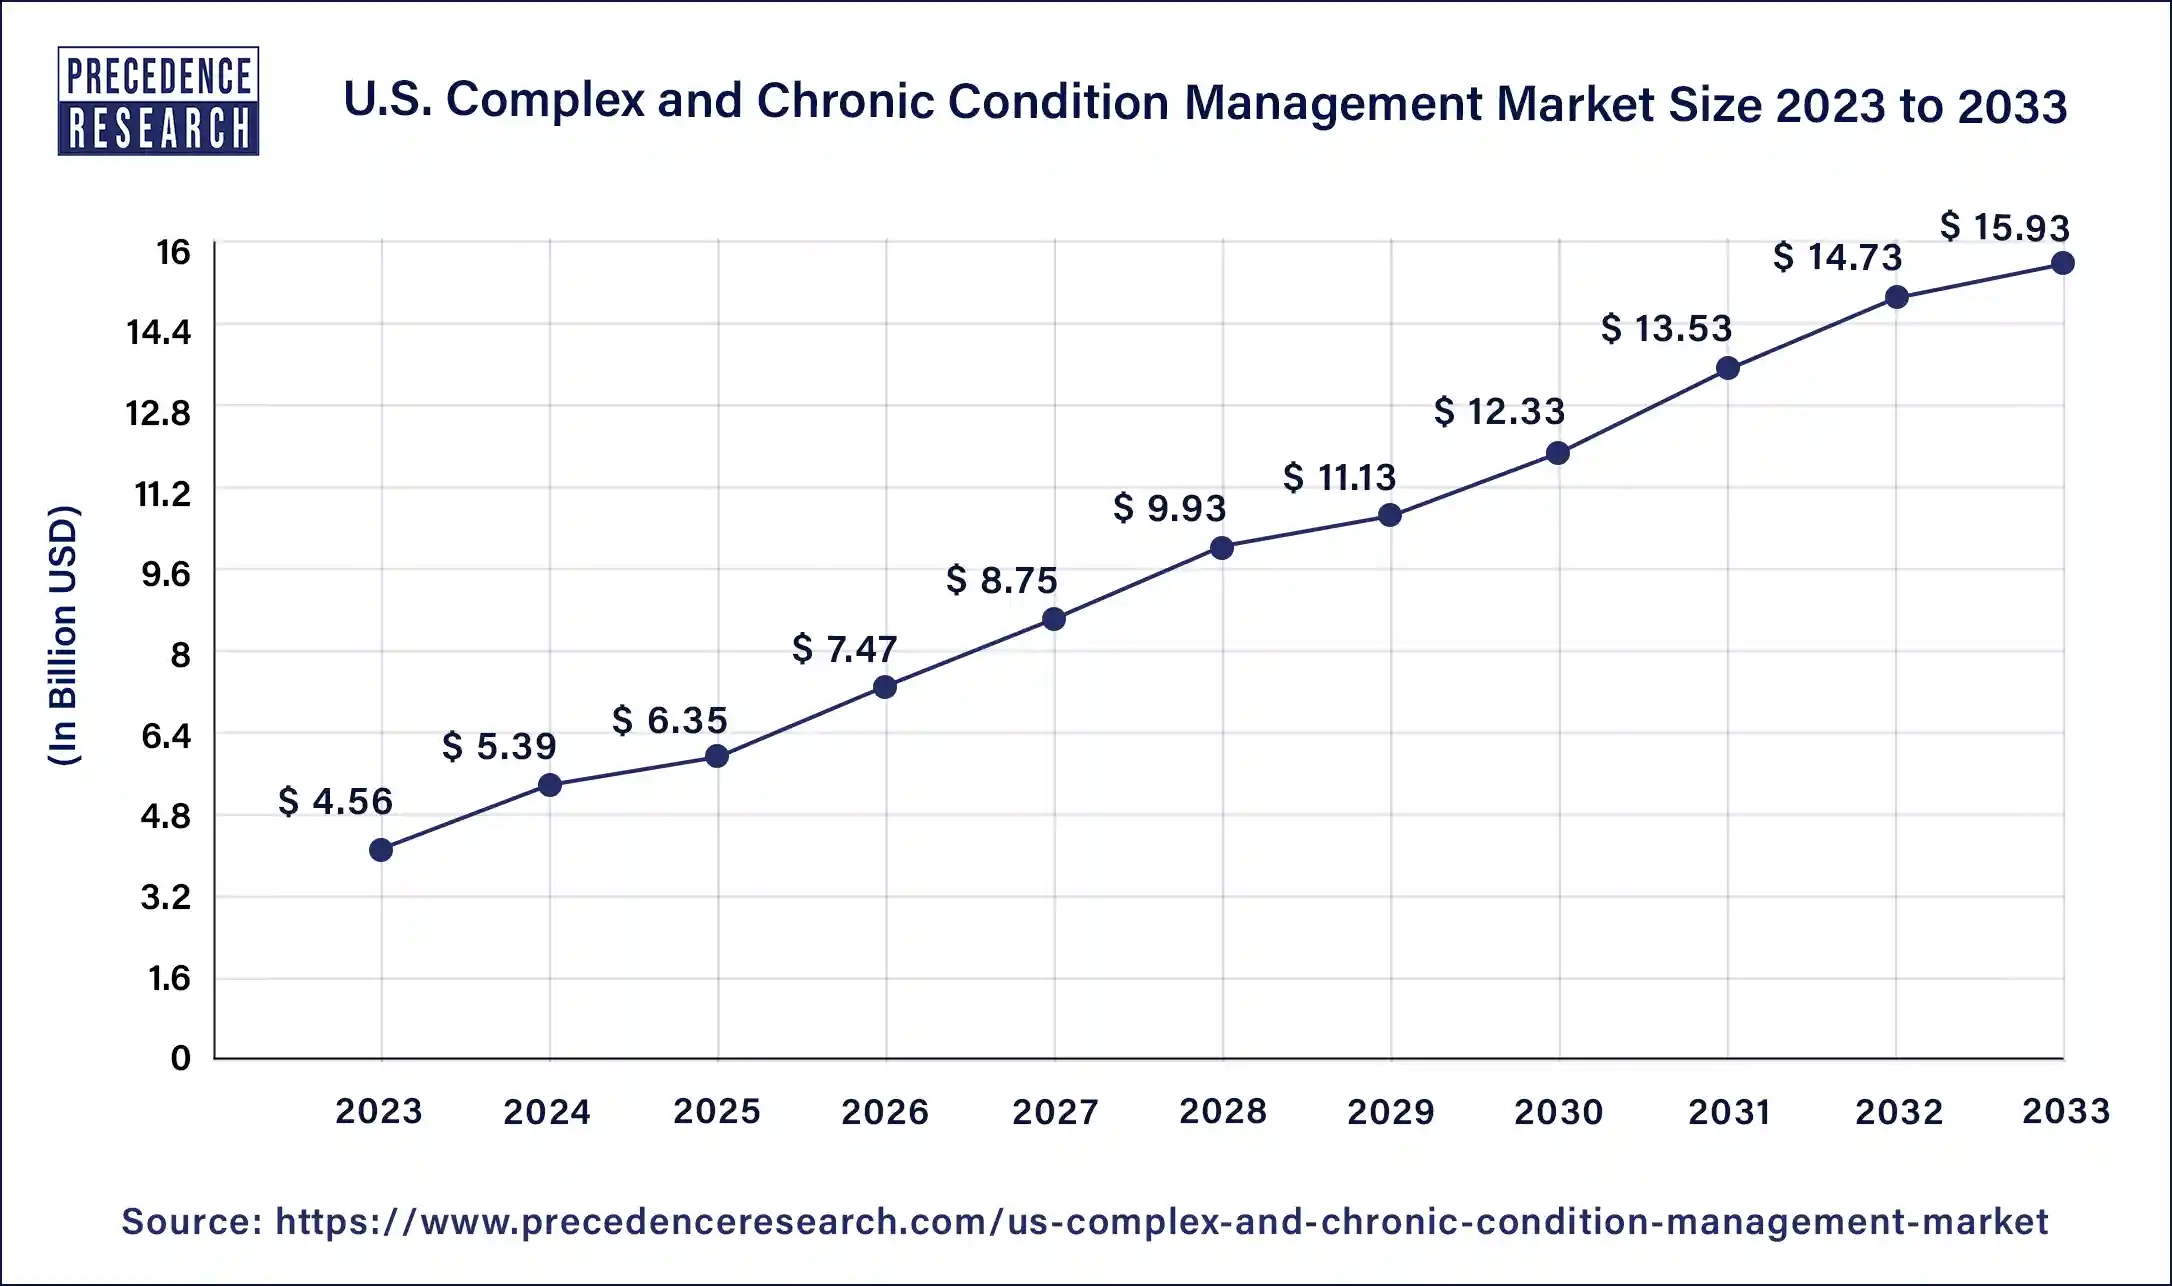 U.S. Complex and Chronic Condition Management Market Size 2024 to 2033